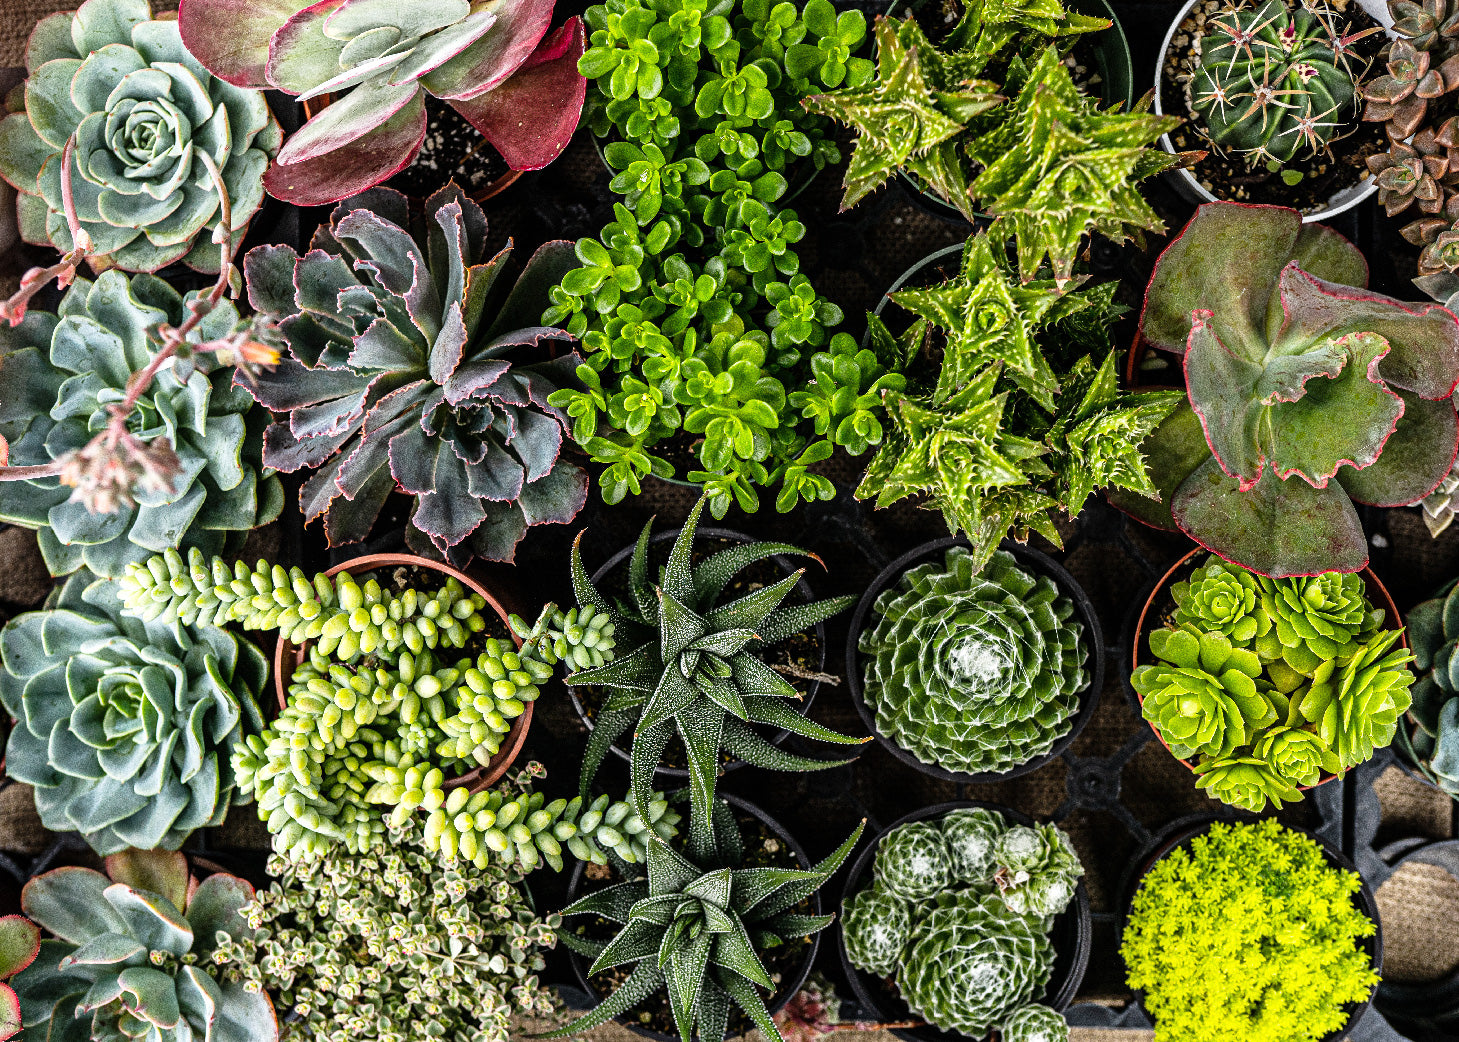 Go to the Cactus & Succulents collection